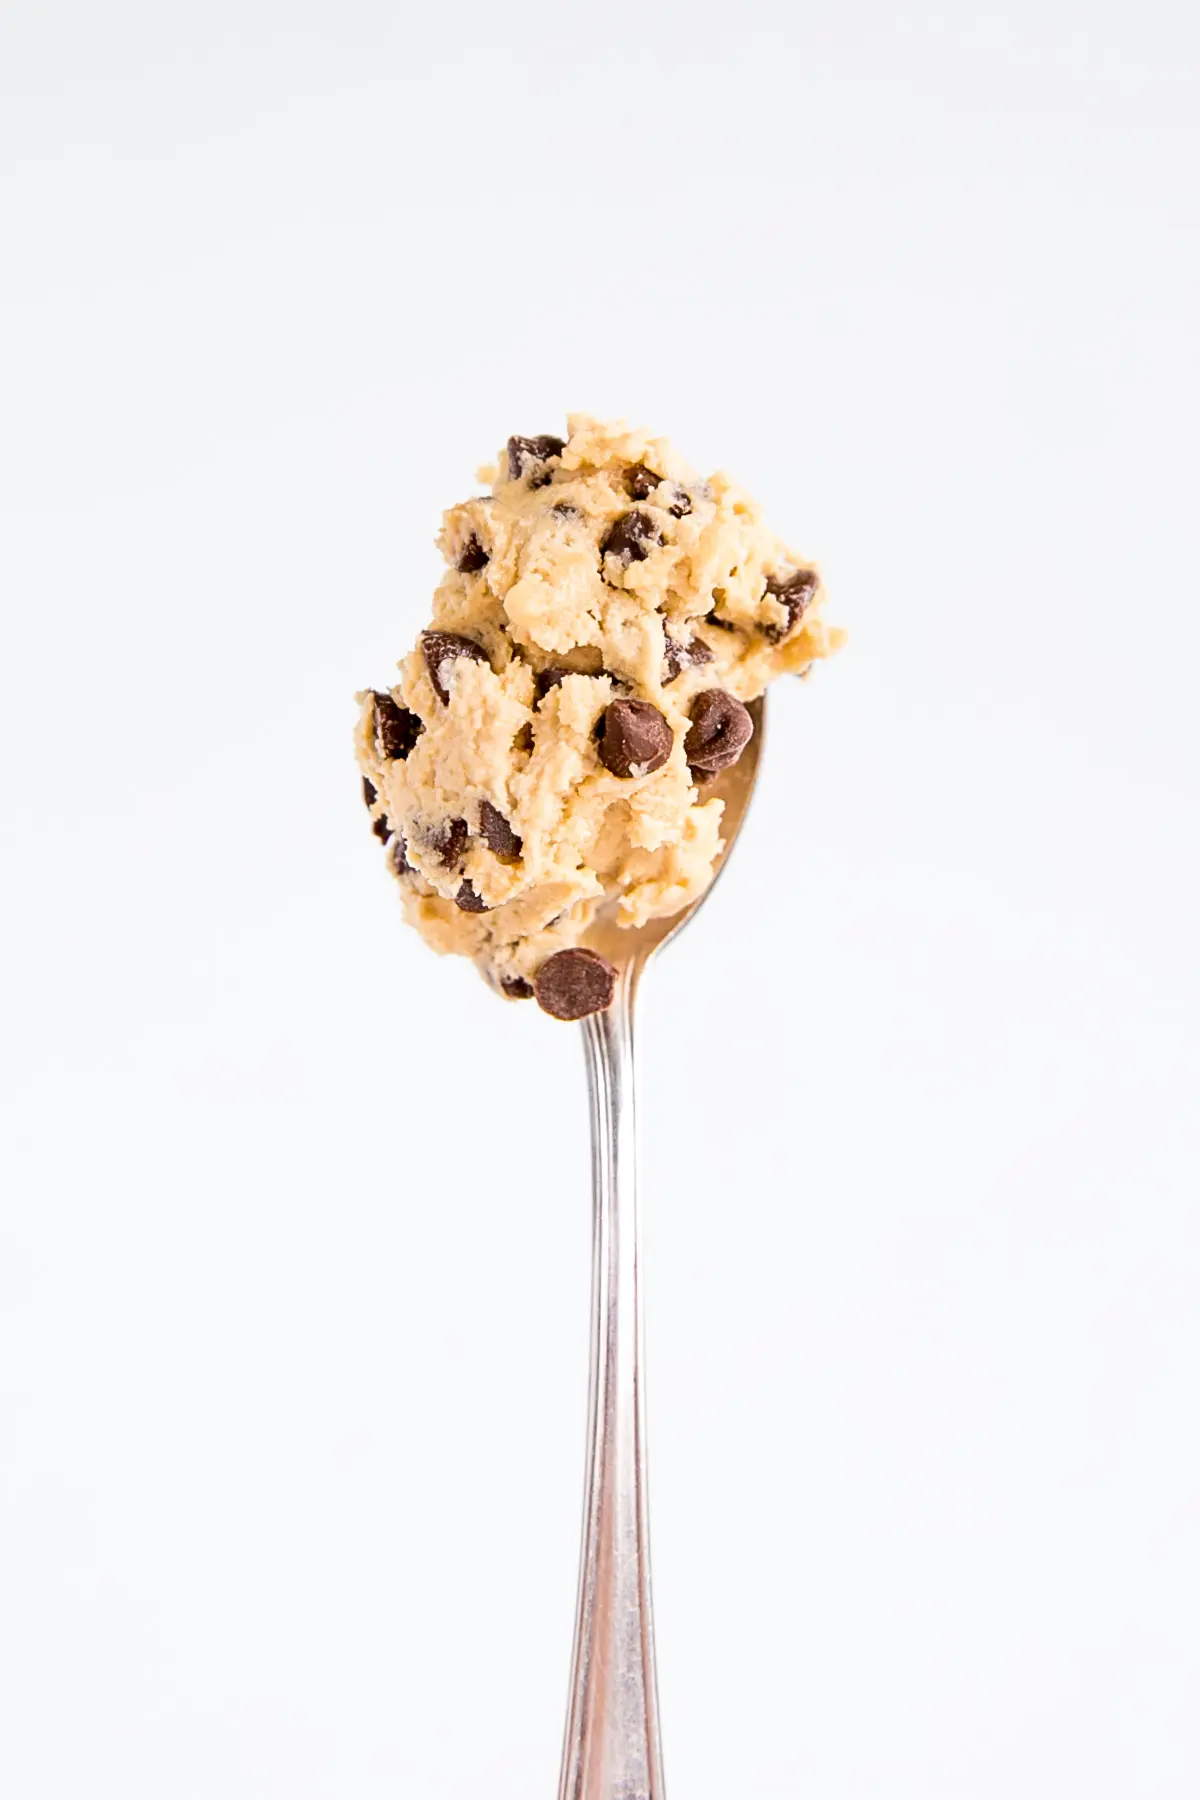 Cookie dough on a spoon.